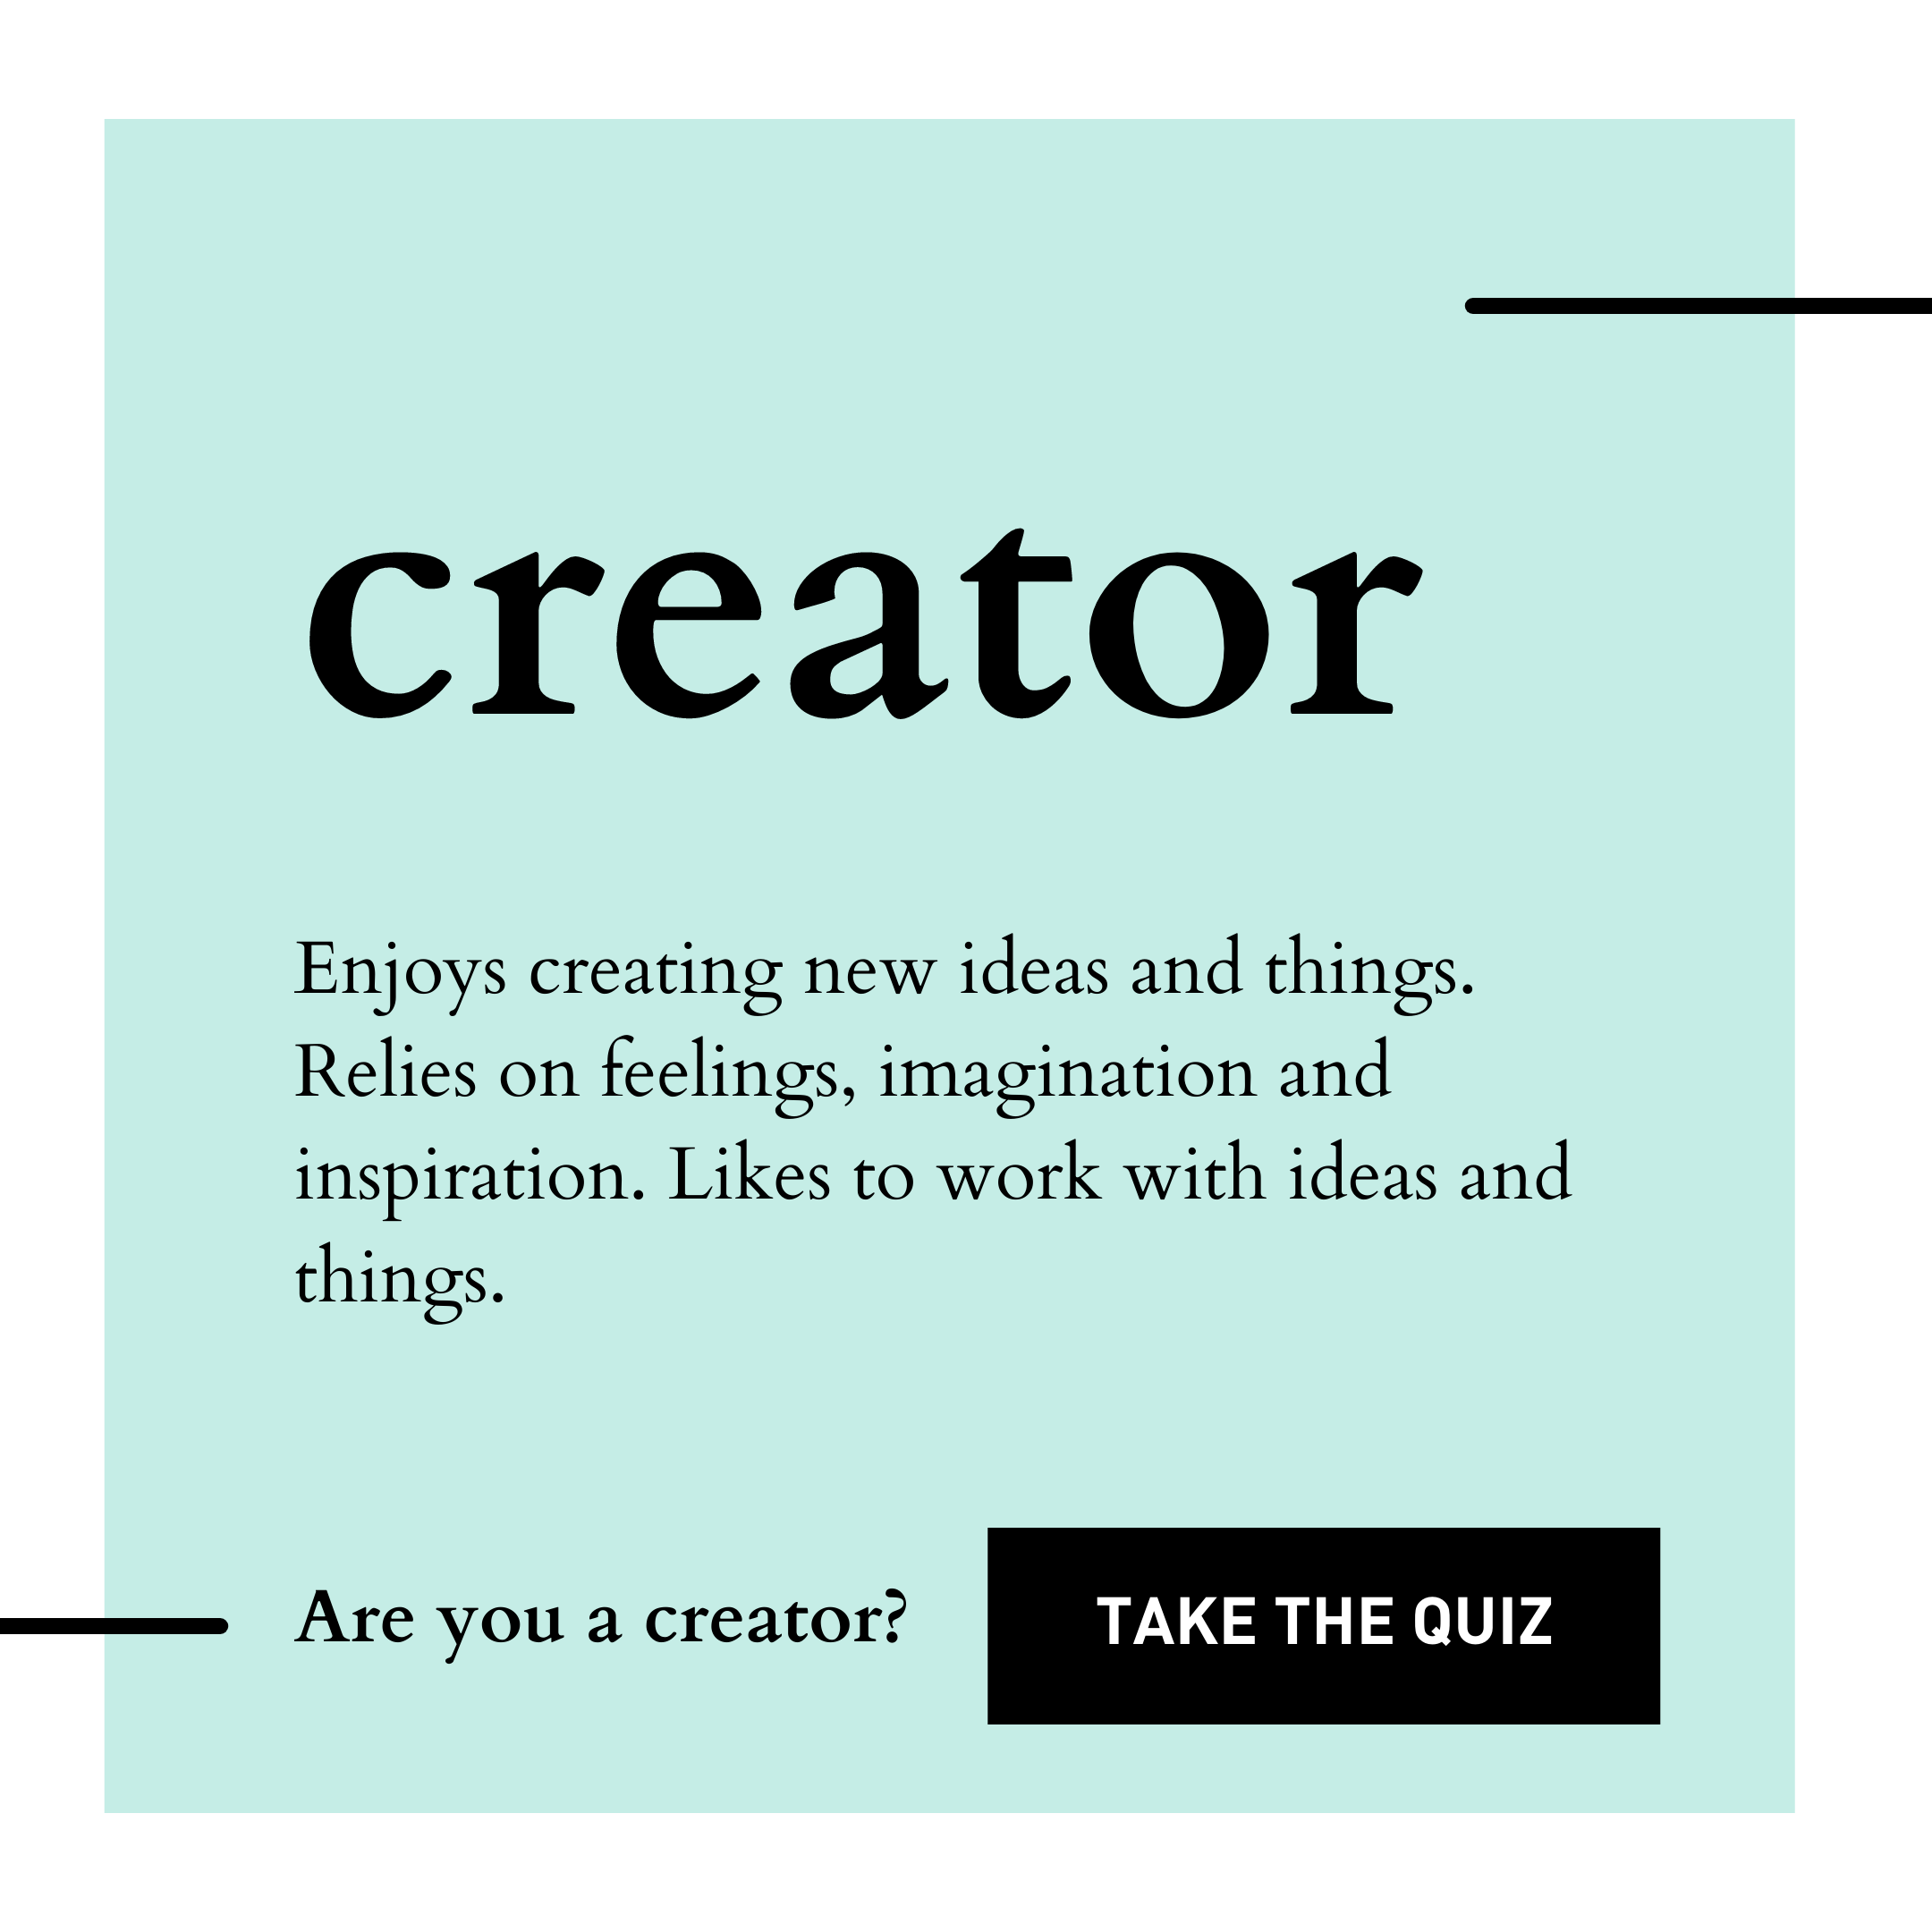 Are you a creator?